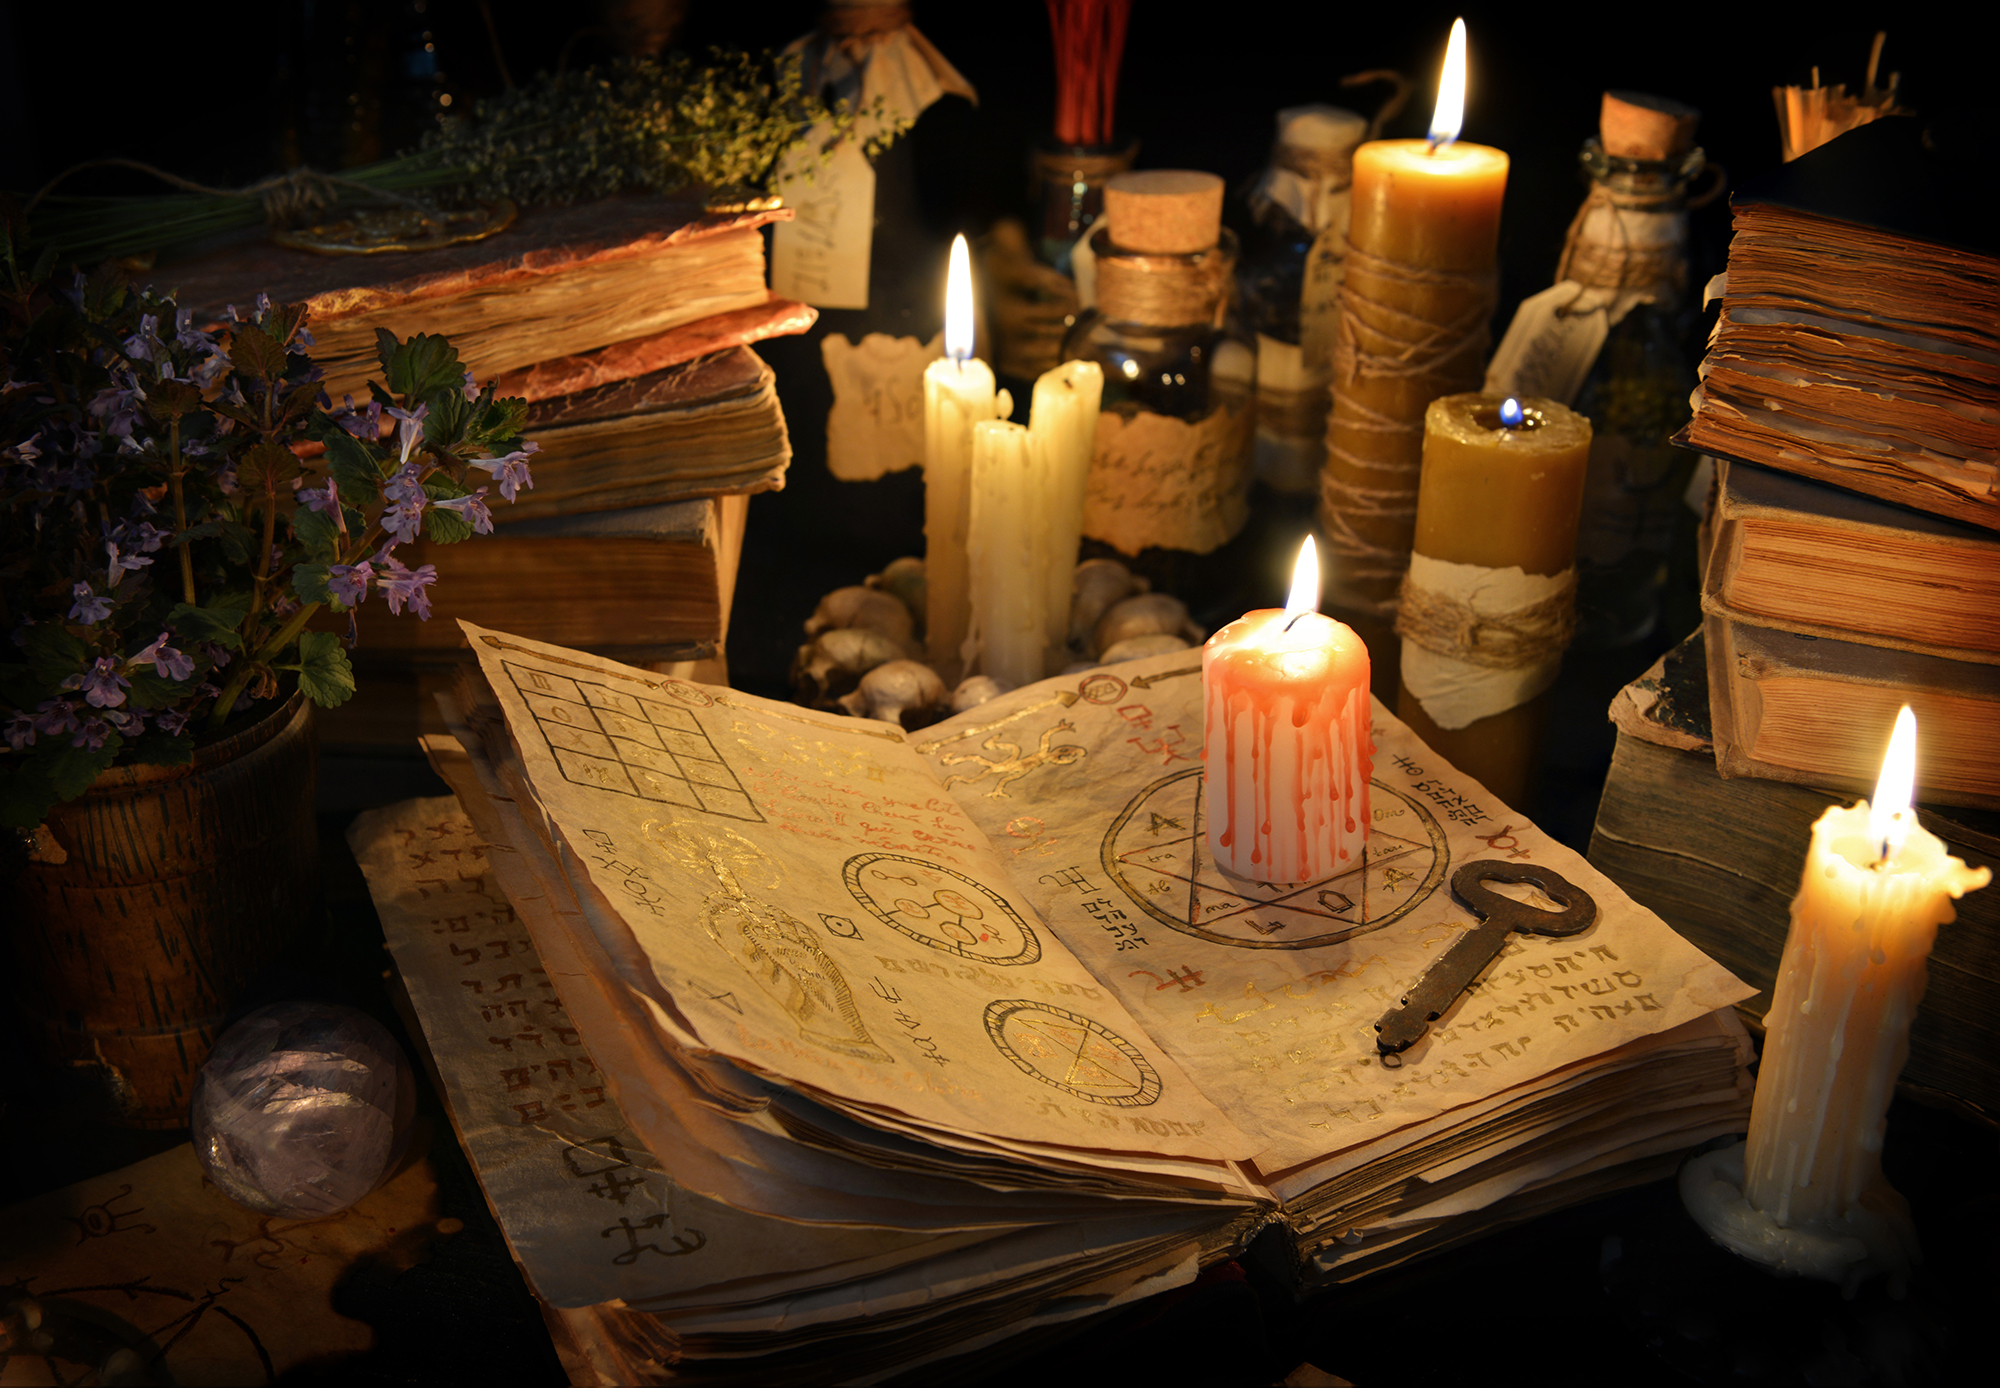 Bloody candle with rustic key on witch book in candle light